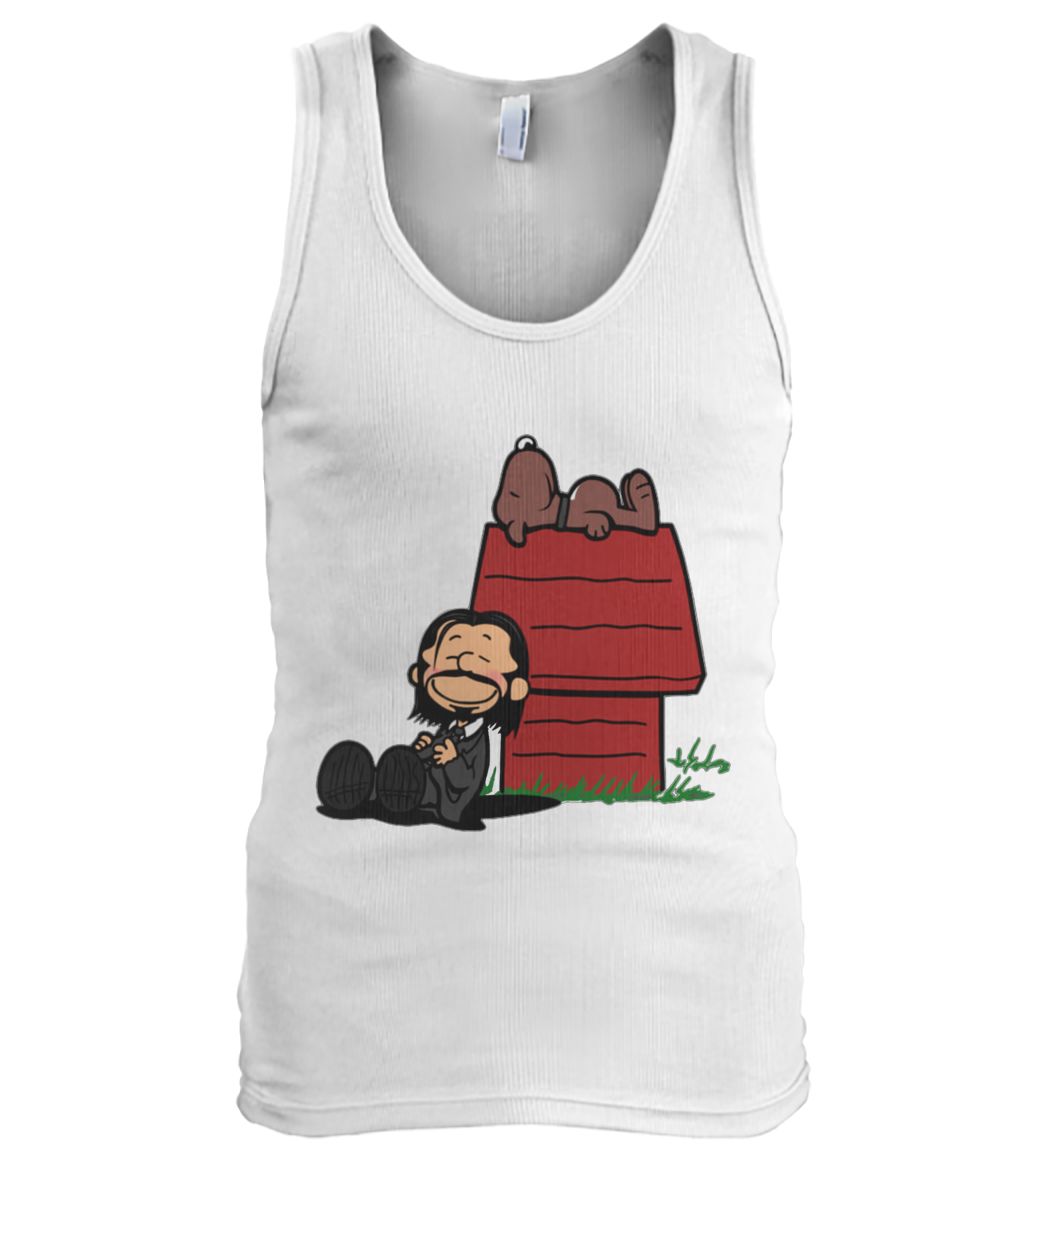 John wick and dog in the style of peanuts charlie brown and snoopy men's tank top